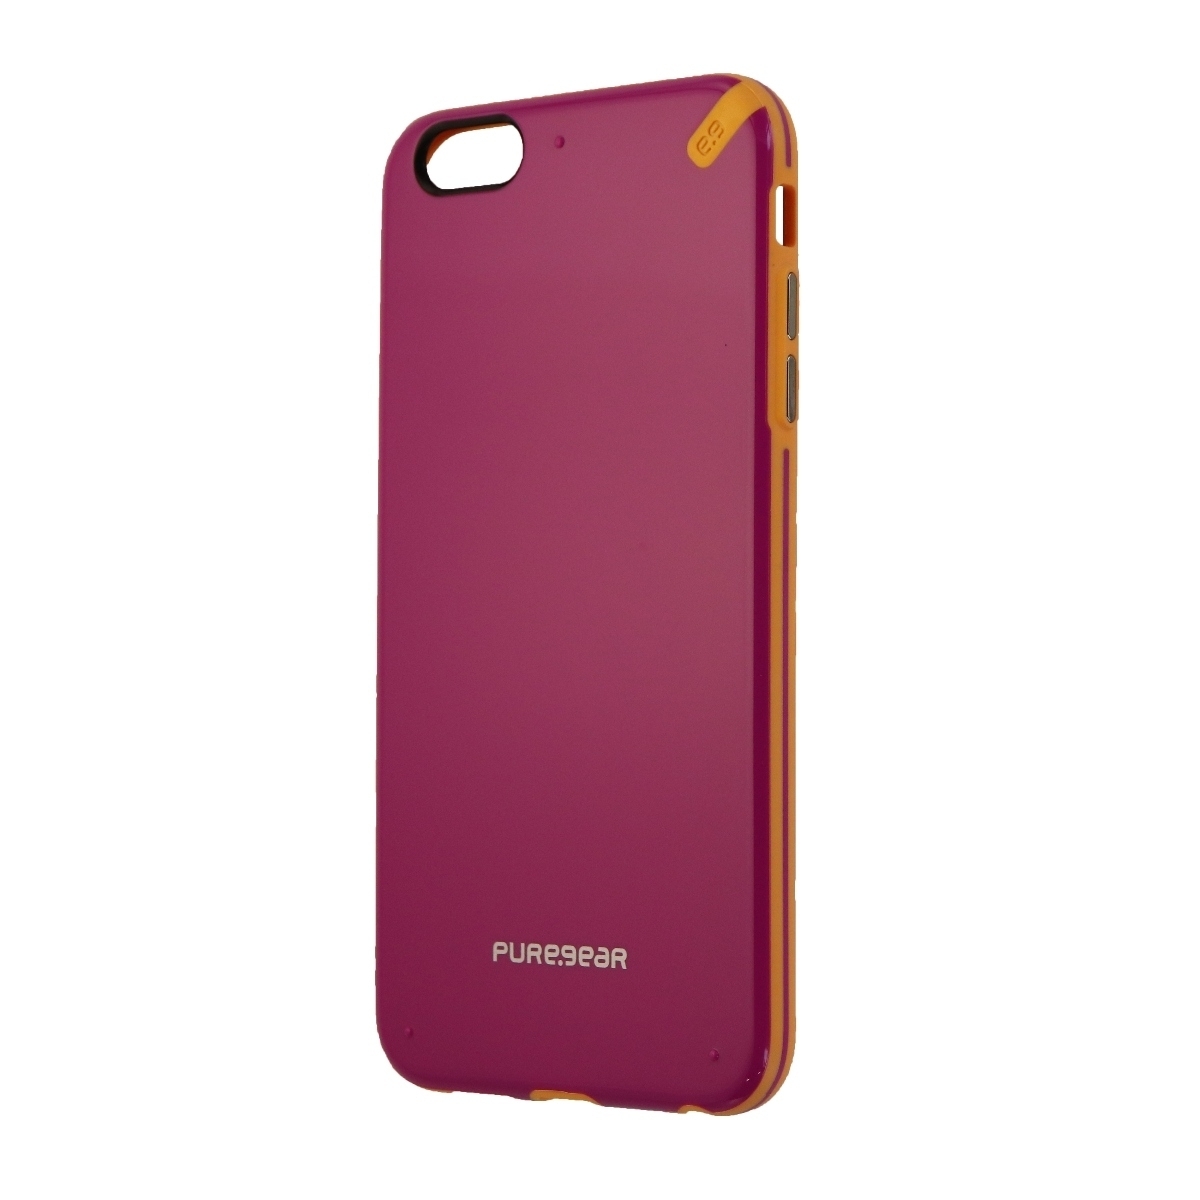 PureGear Slim Shell Hard Case Cover For IPhone 6s Plus 6 Plus - Sunset Pink